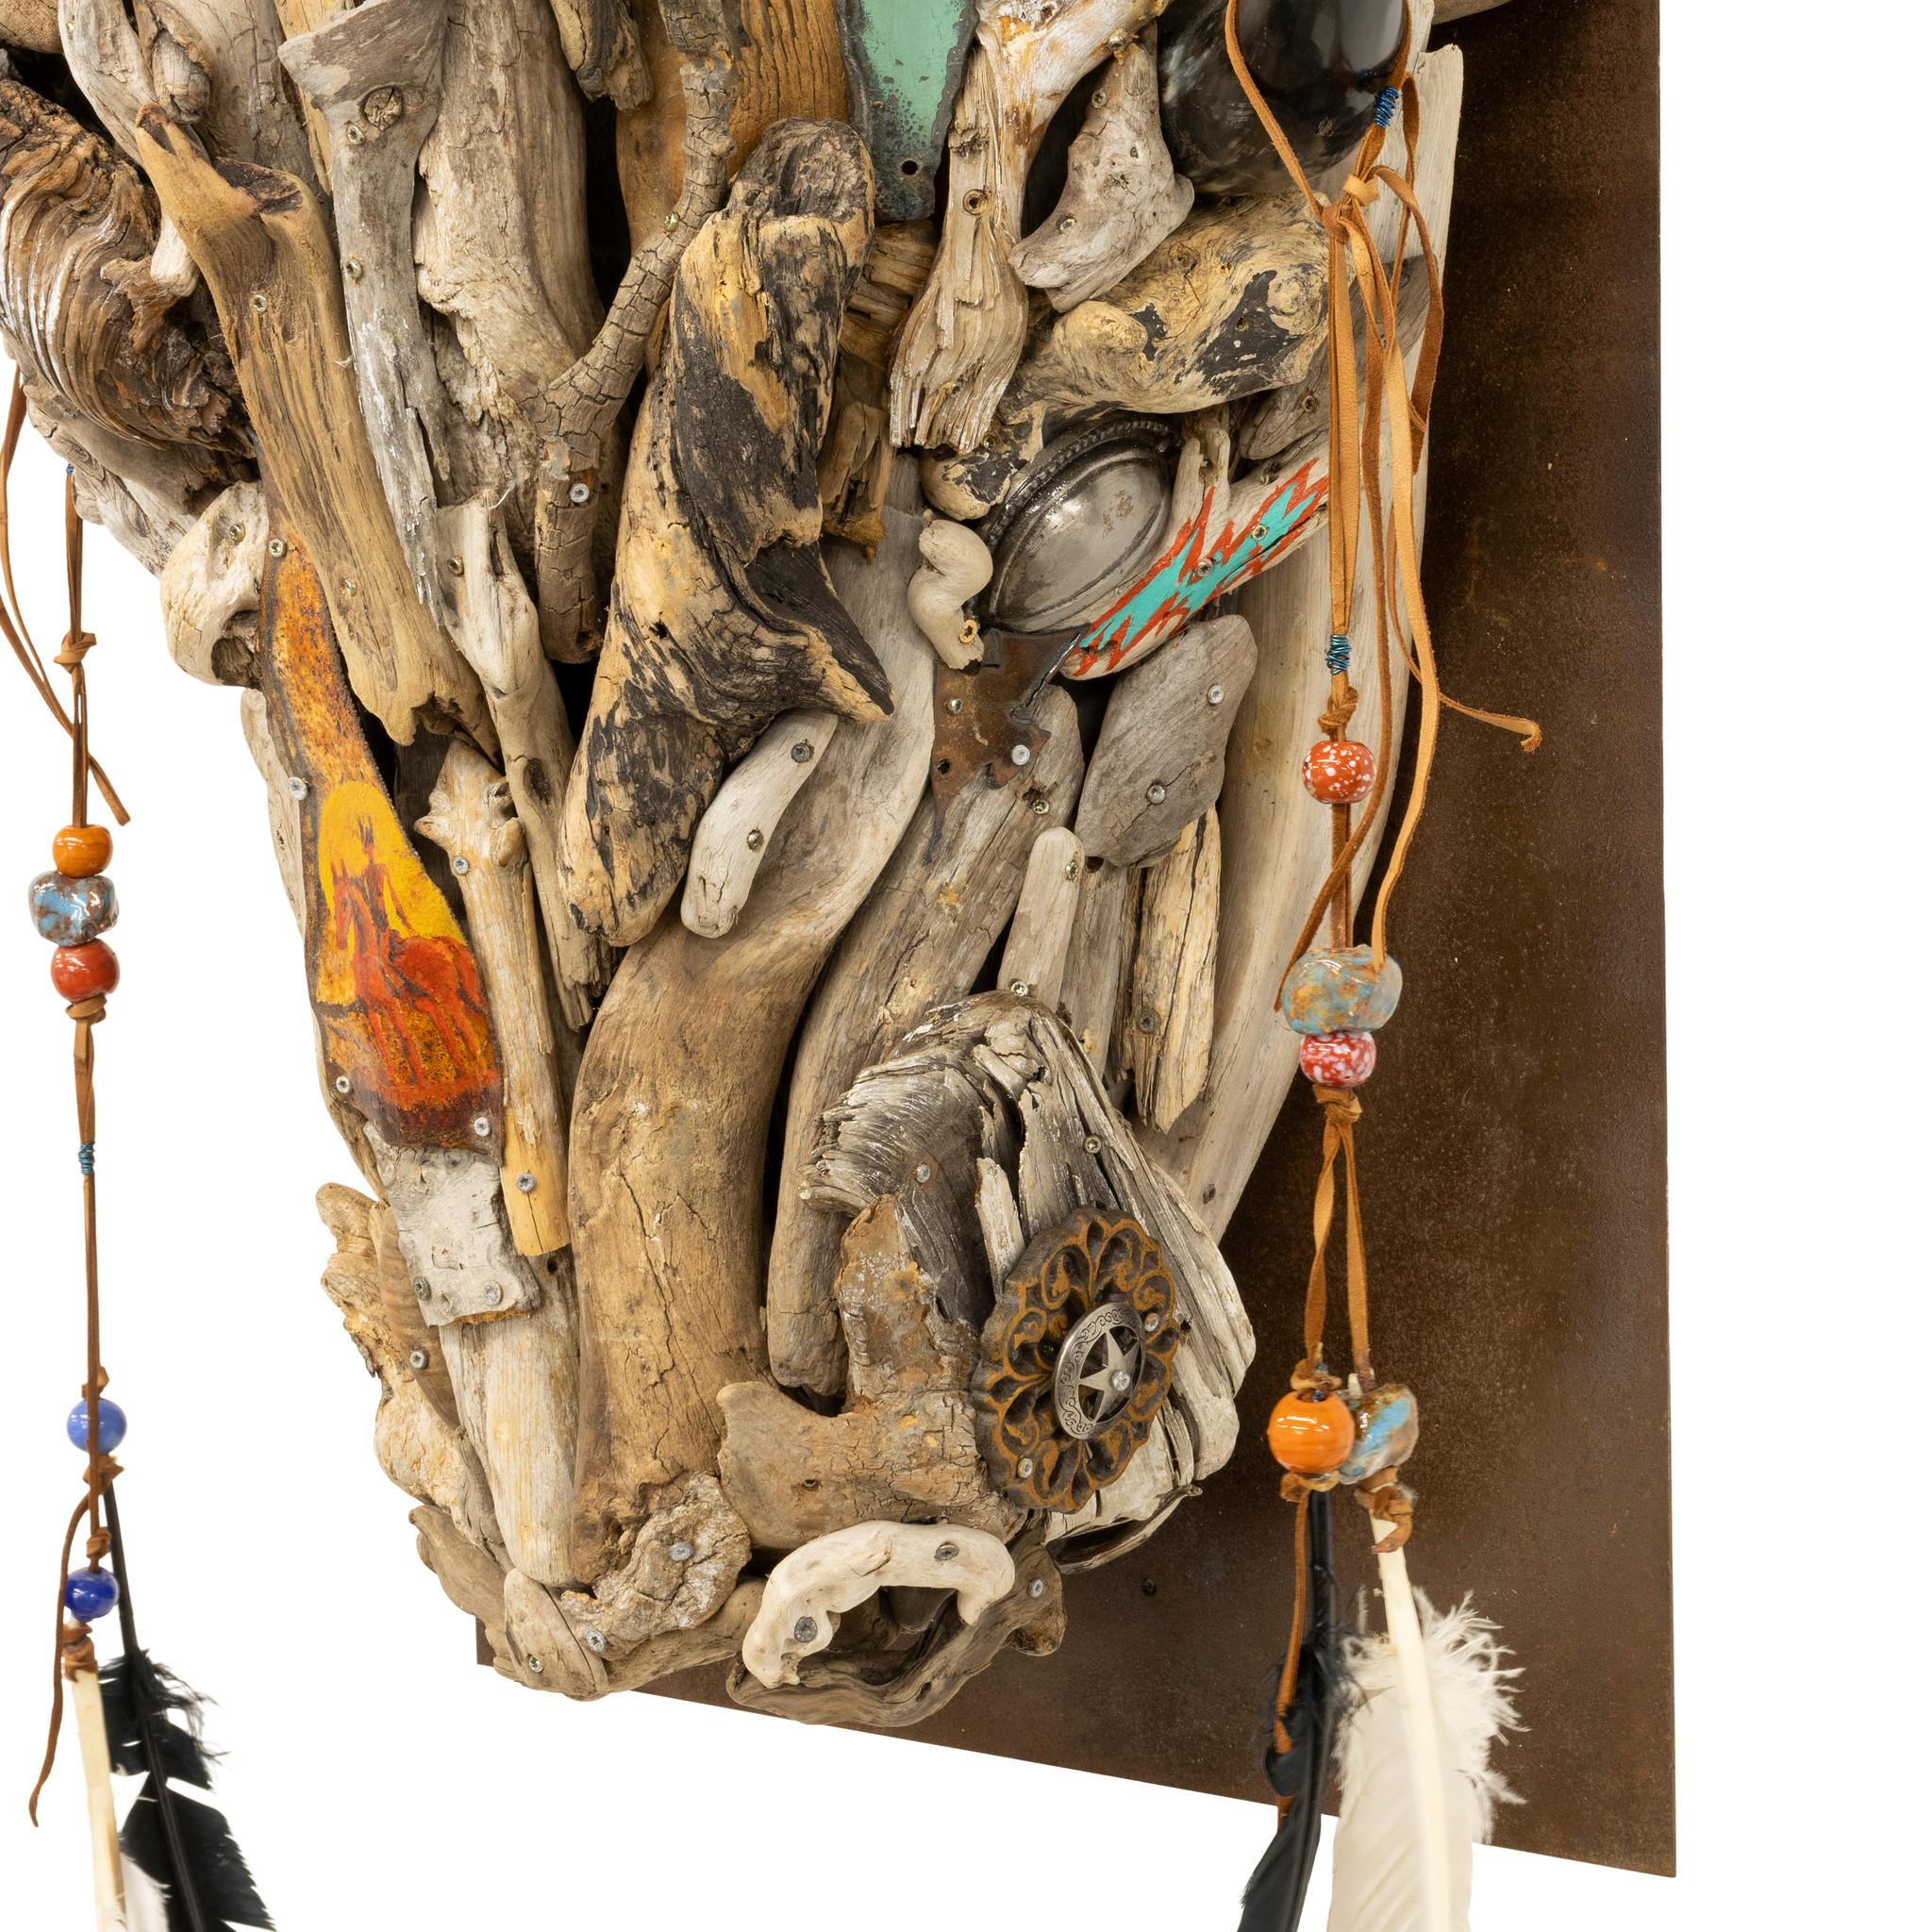 Buffalo head made of driftwood and scrap yard steel by a Montana artist by Tina Milsavljevich. Tina grew up in the beauty of Colorado, the breath-taking rugged mountains and wildlife served as a peaceful and inspirational backdrop. From an early age